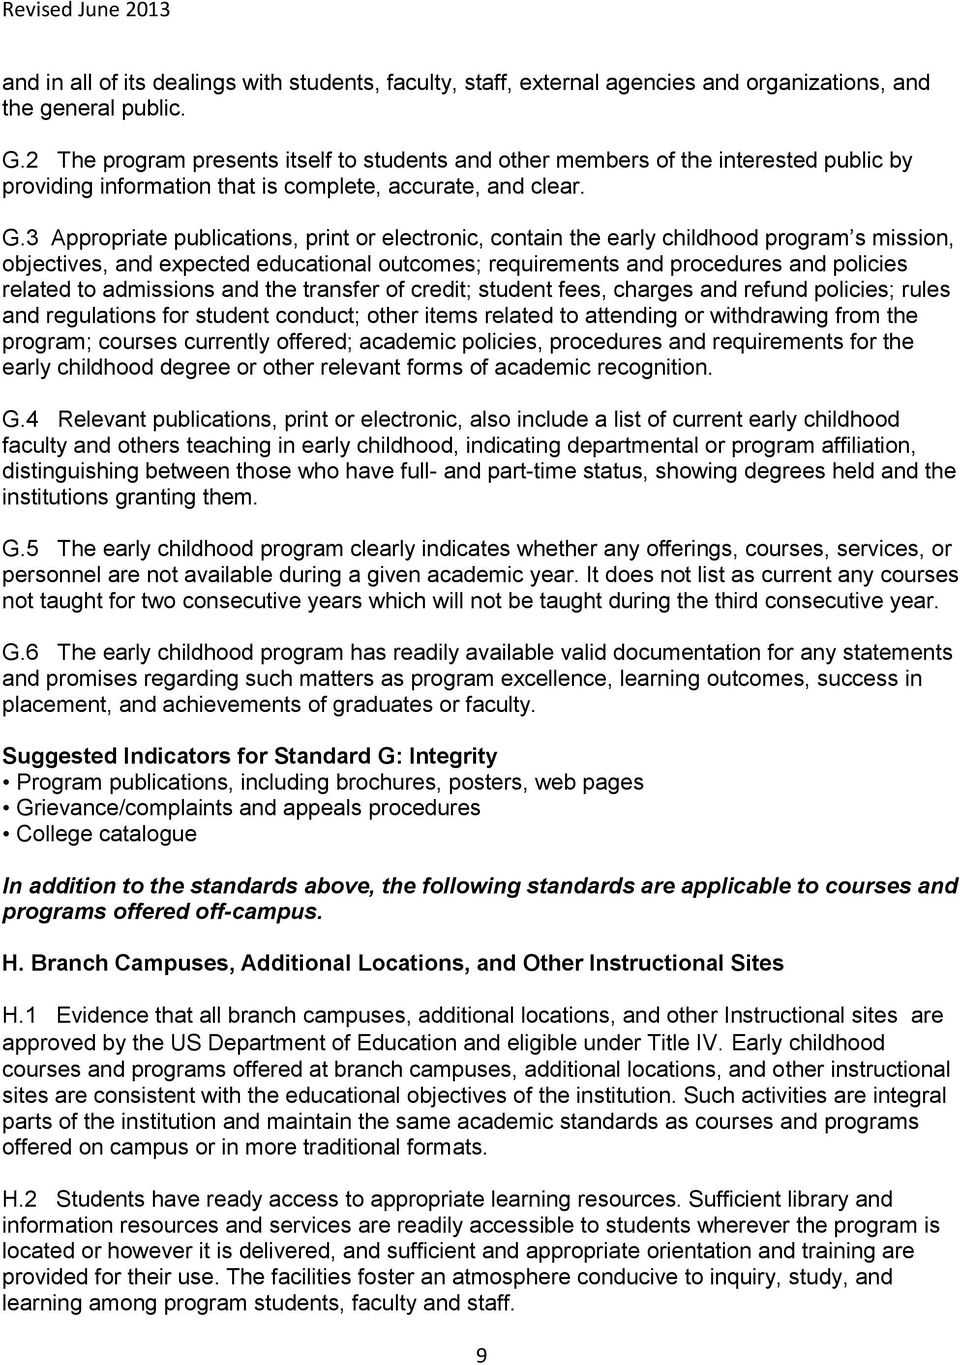 3 Appropriate publications, print or electronic, contain the early childhood program s mission, objectives, and expected educational outcomes; requirements and procedures and policies related to